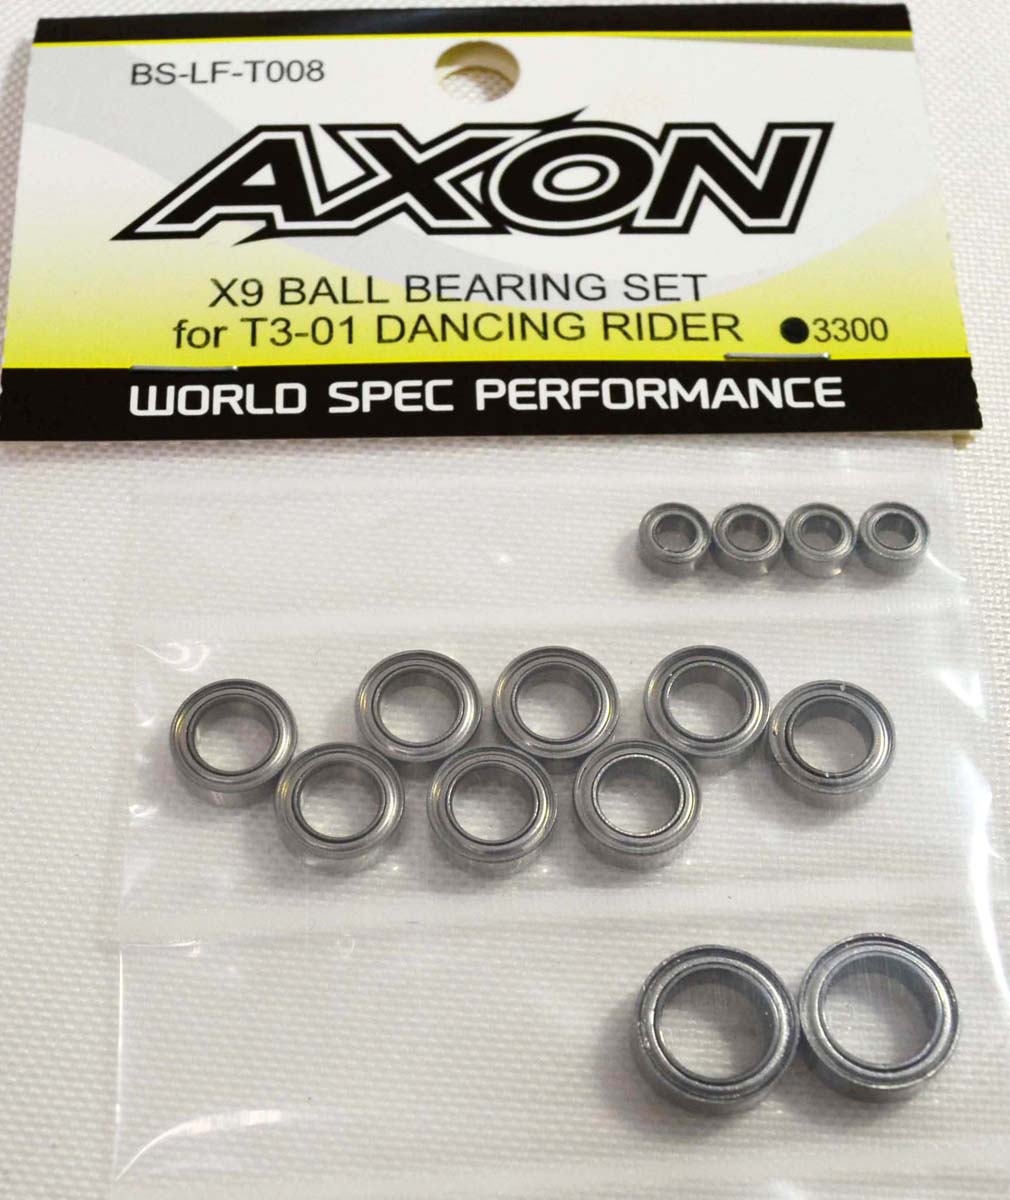 AXON X9 BALL BEARING SET for T3-01 DANCING RIDER【BS-LF-T008】 ラジコンパーツ